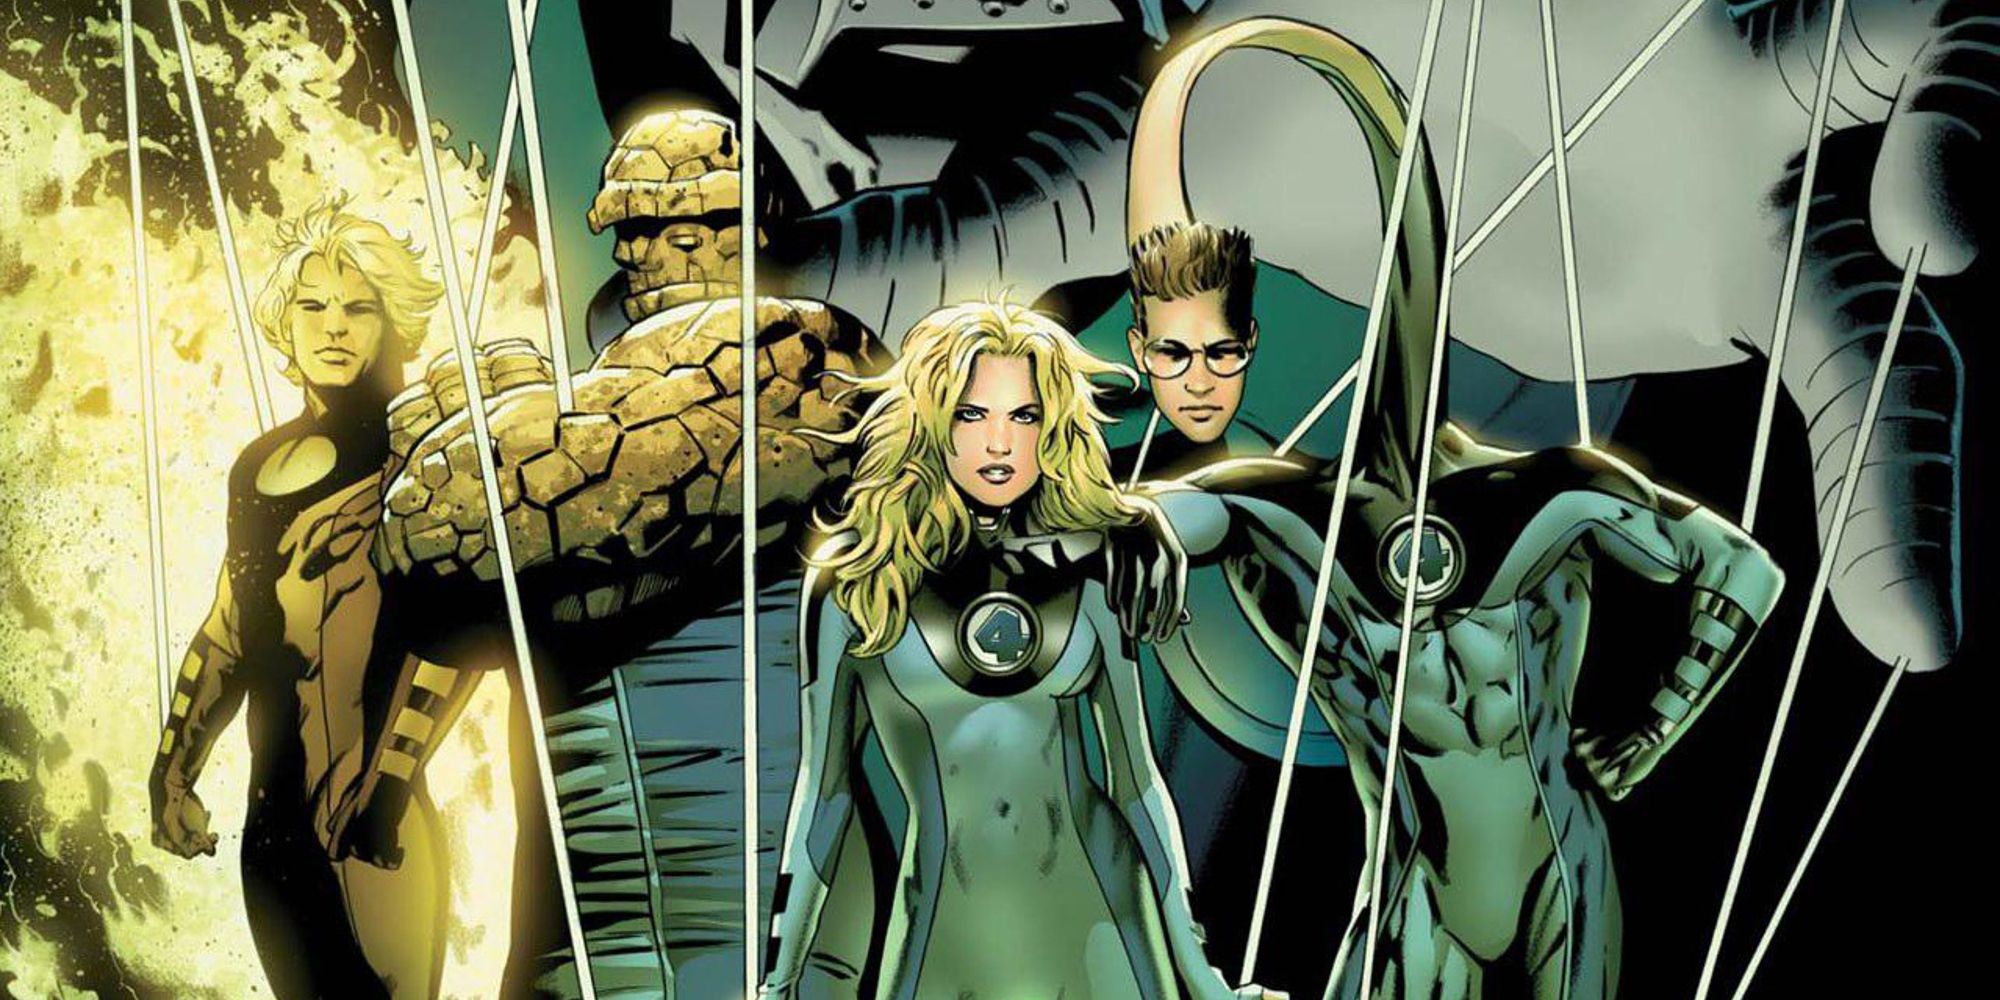 The Fantastic Four posed together in cover artwork for Ultimate Fantastic Four